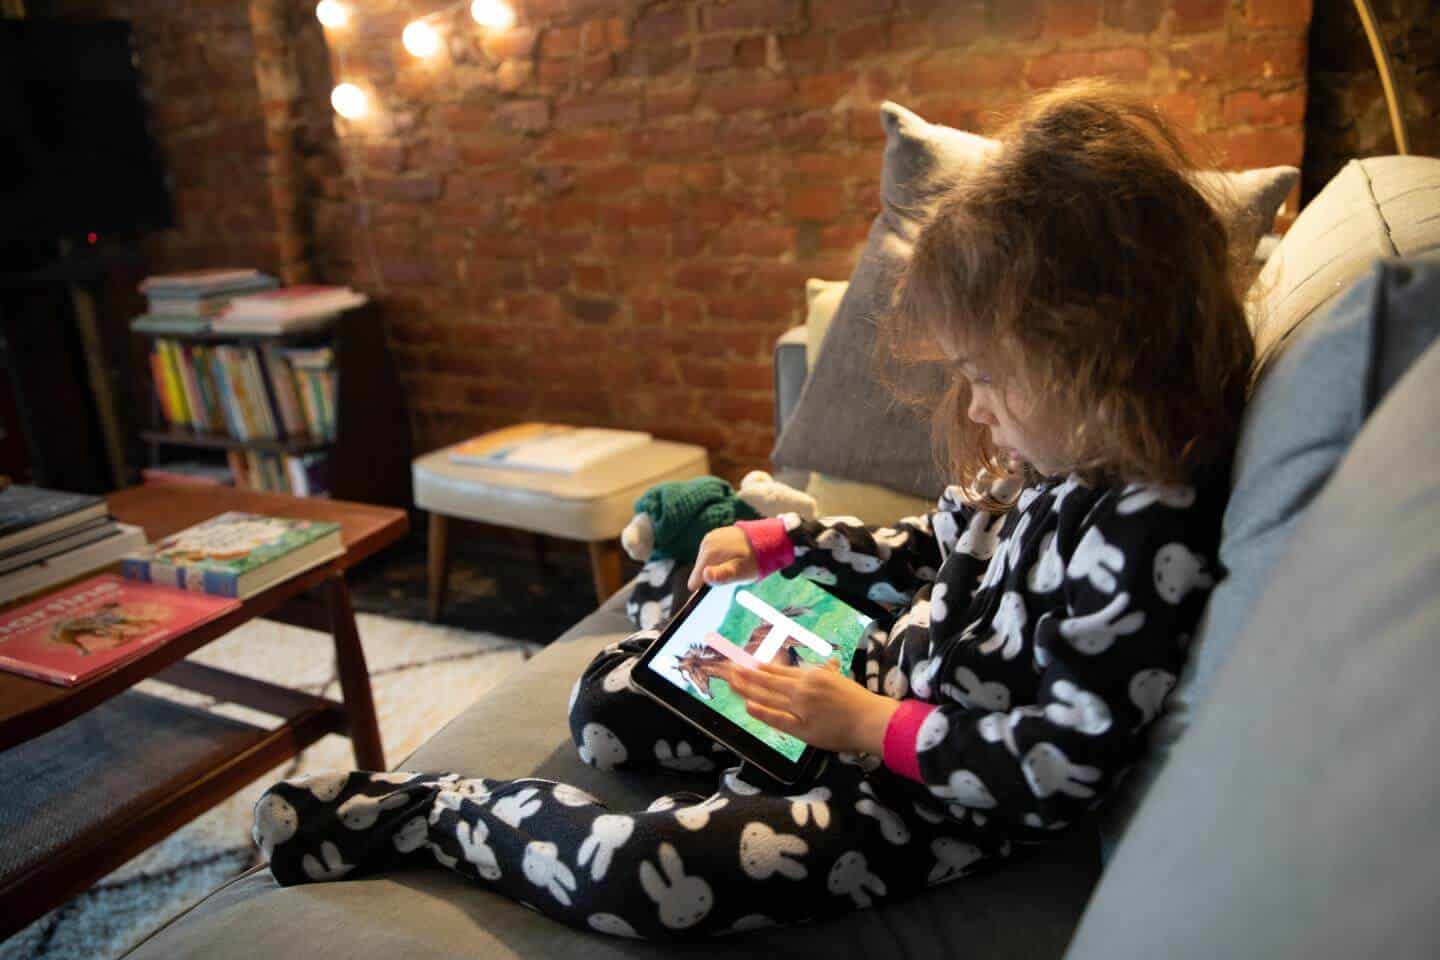 Childrens-Mental-Health-Suffered-During-The-Pandemic-As-They-Grew-Up-With-Screens-1